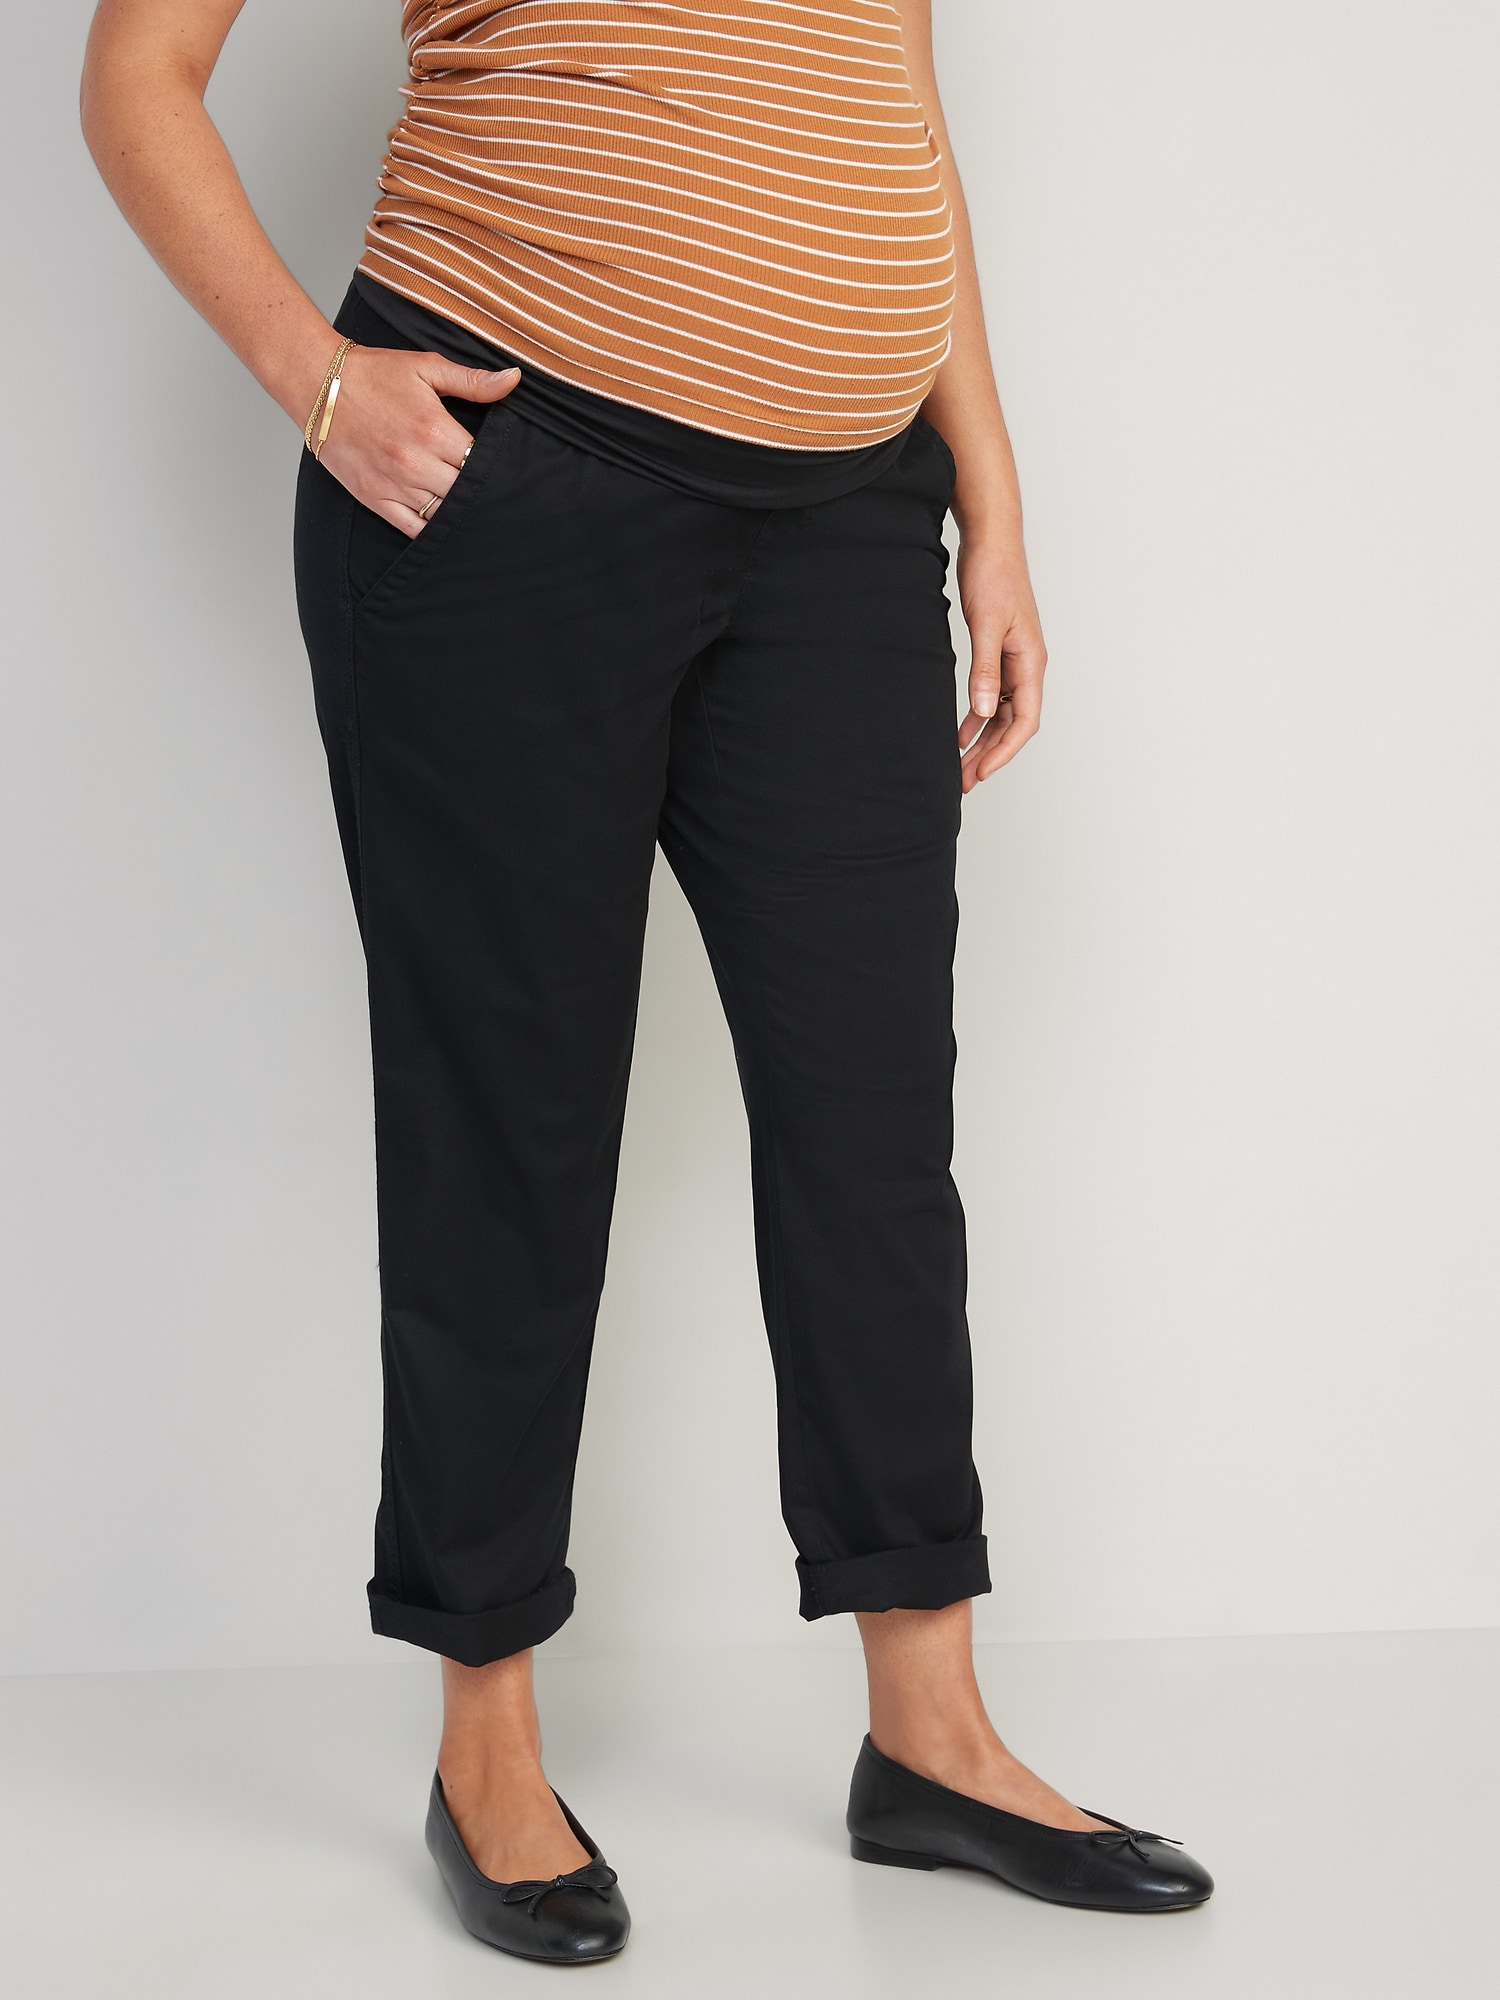 15 Stylish Pairs of Maternity Work Pants to Rock During Pregnancy